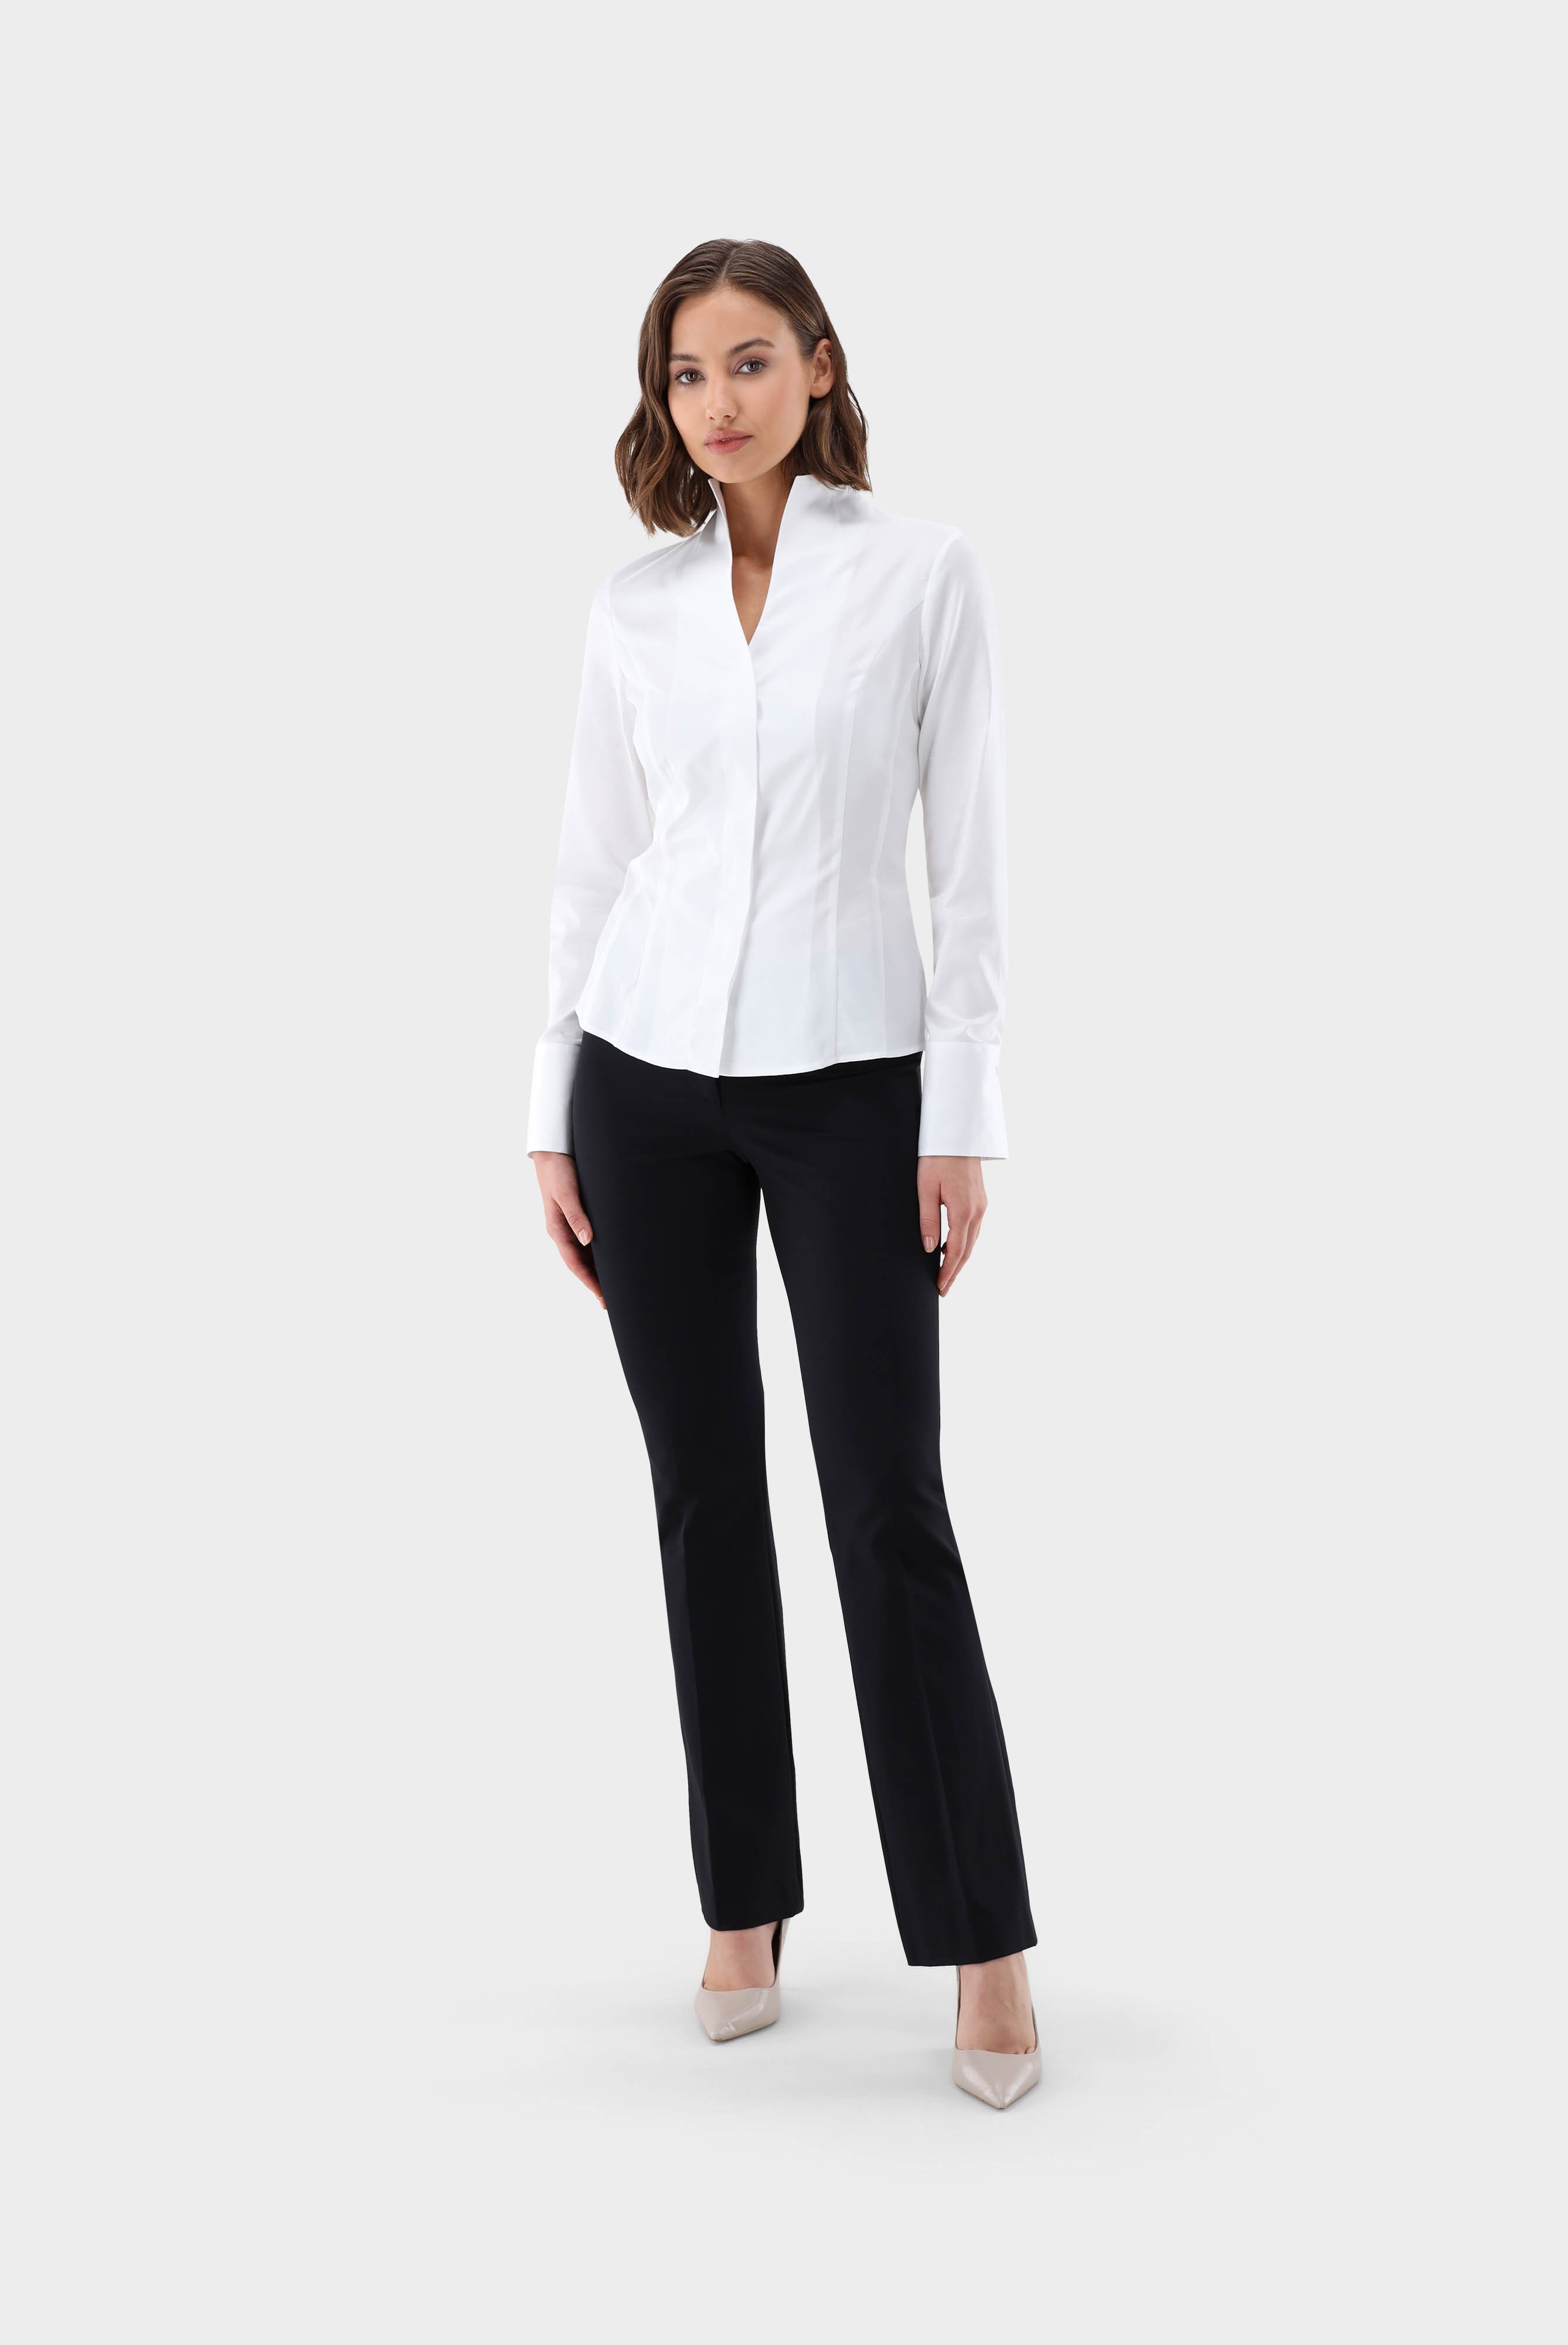 Business Blouses+Twill Chalice Collar Blouse+05.3612.73.130148.000.44